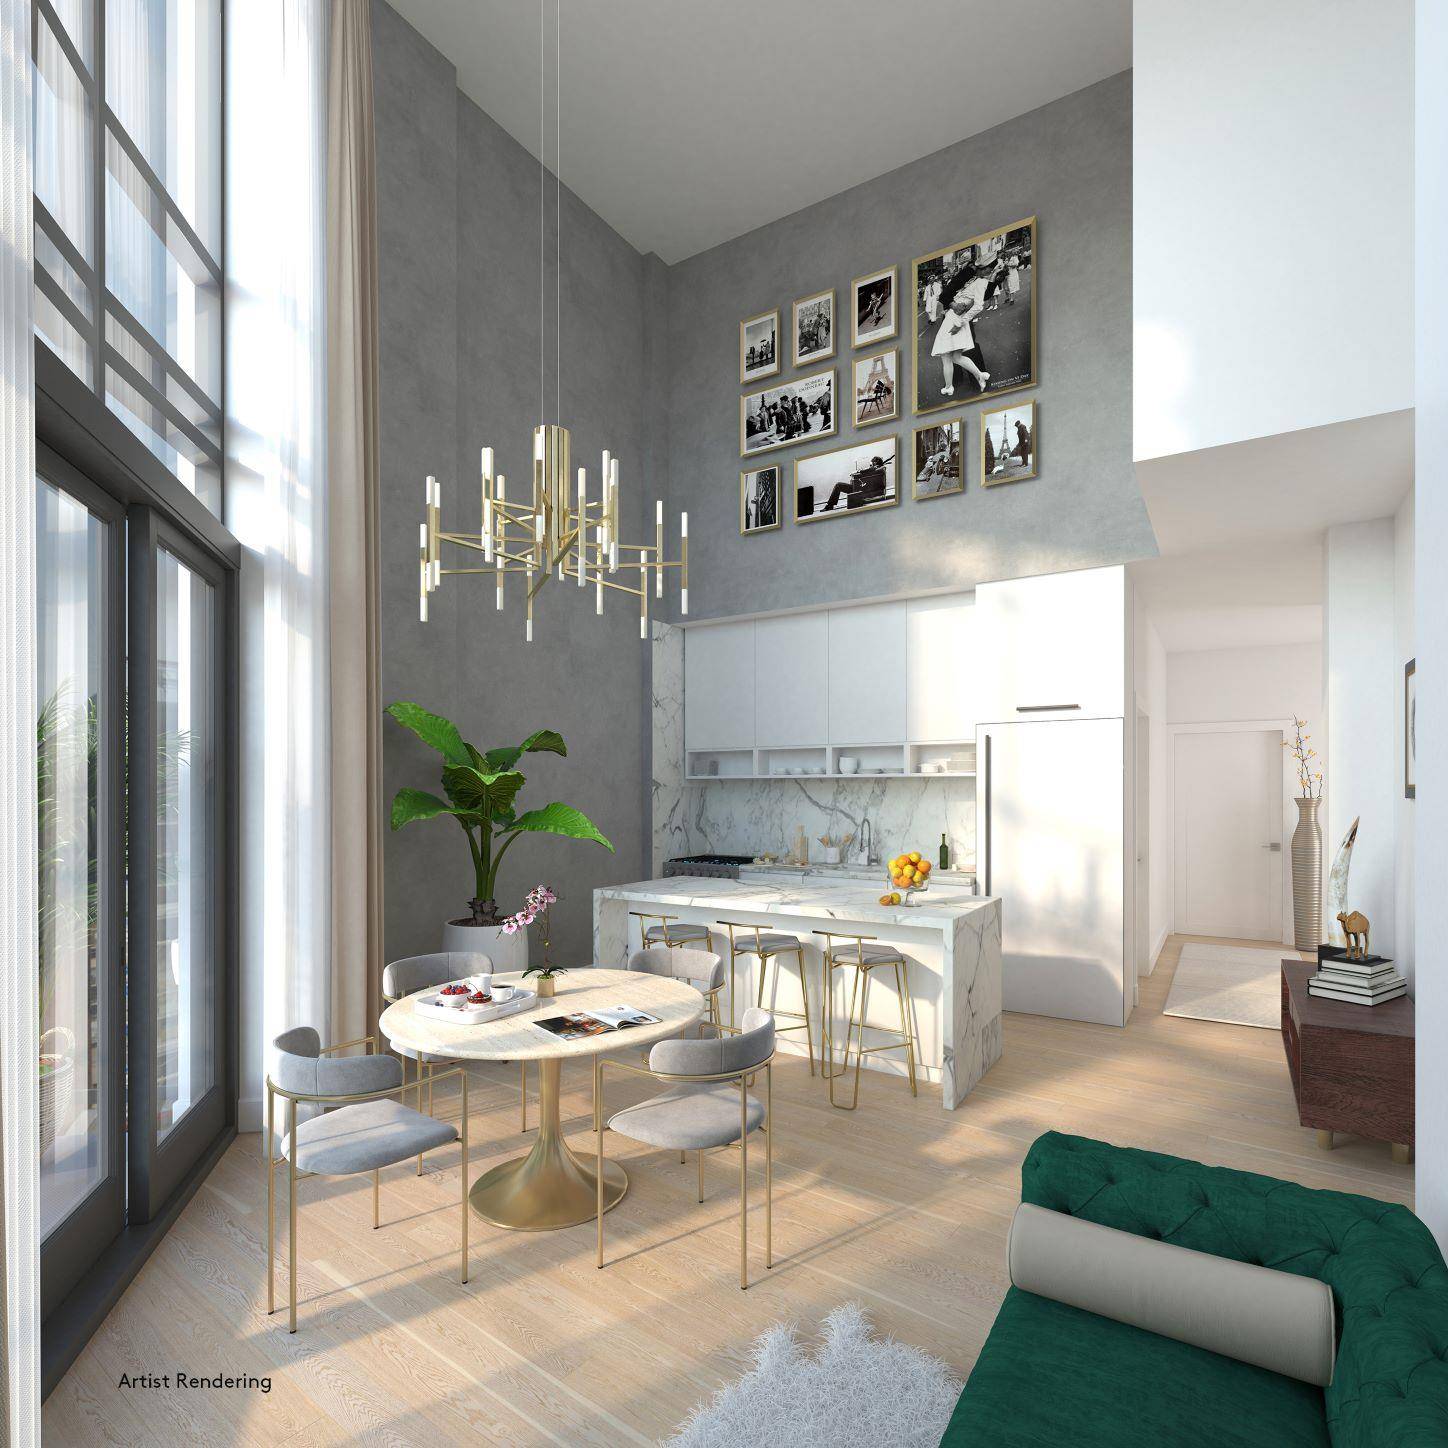 HOLIDAY PRICING AND IMMEDIATE OCCUPANCY Experience a new standard of luxury living in the heart of Long Island City at the Anable.